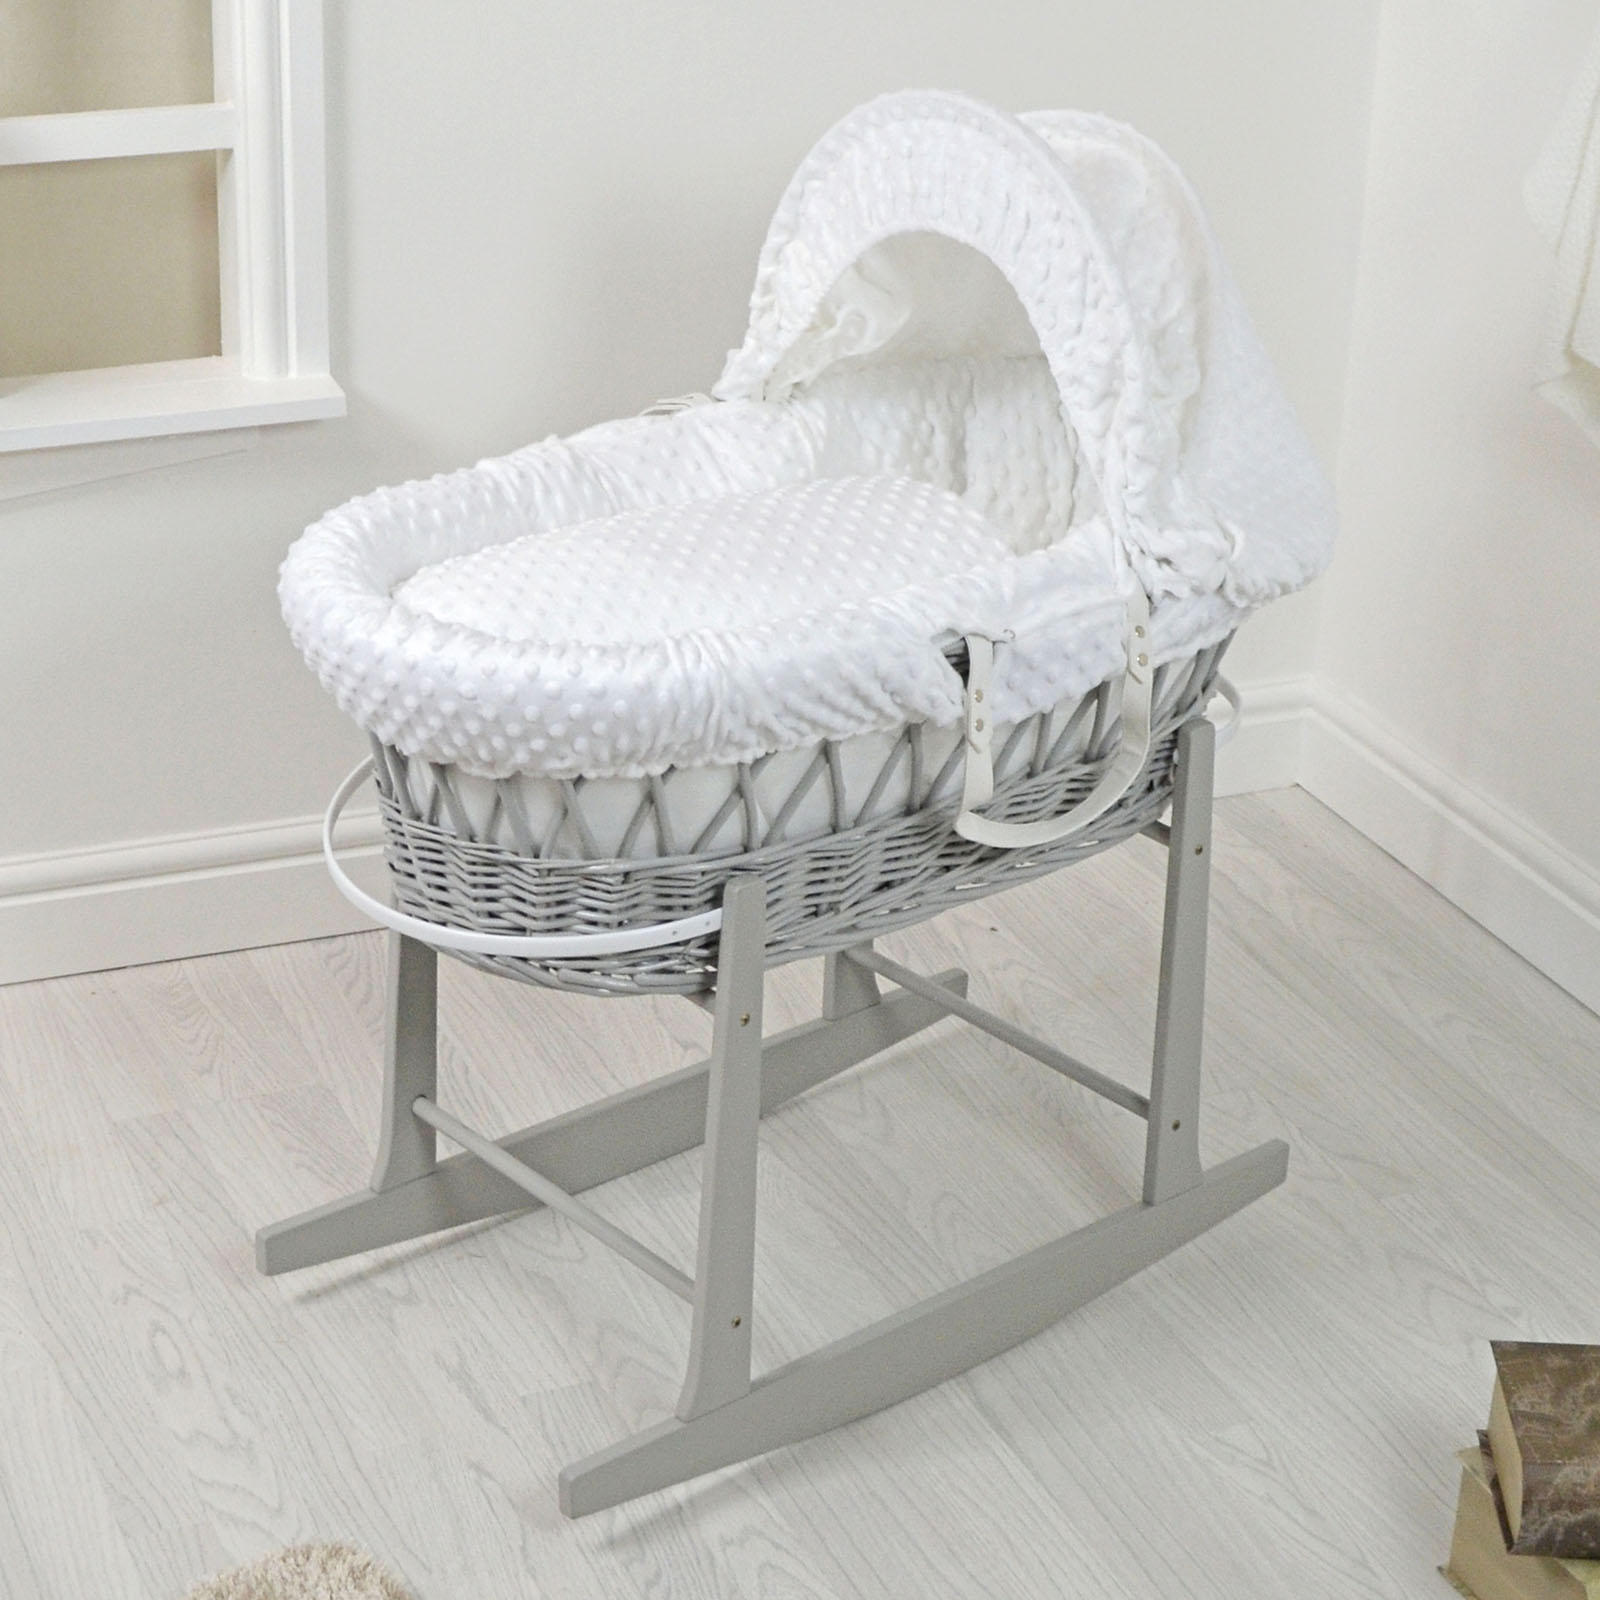 4Baby Padded Grey Wicker Moses Basket & Rocking Stand - White Dimple...